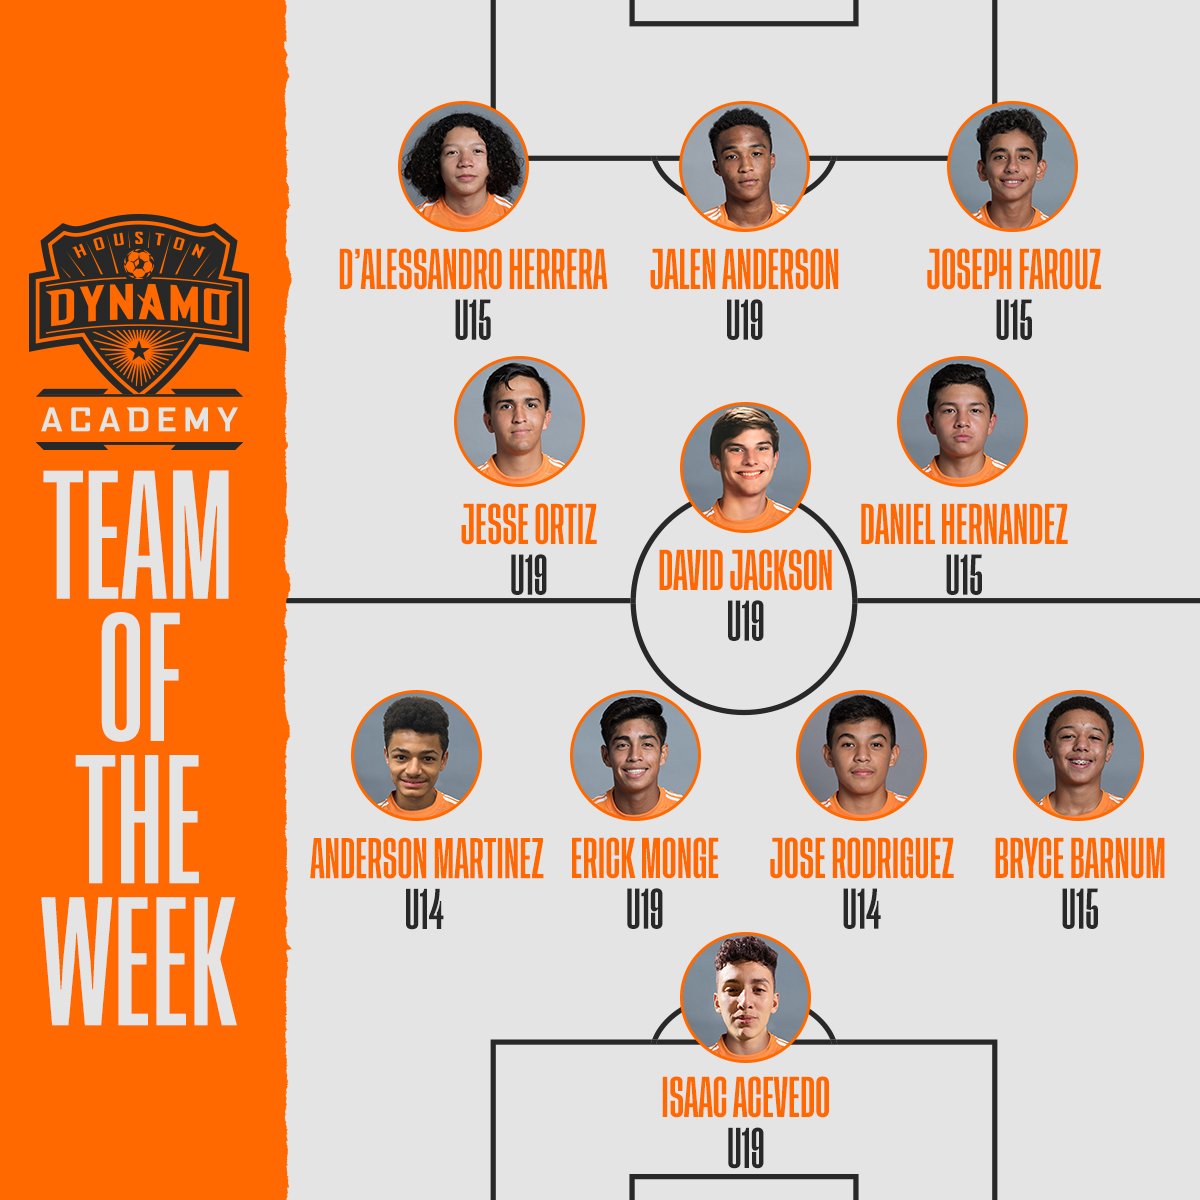 Spring season underway for the kiddos!  Top performers from the @DynamoAcademy last weekend: ow.ly/kG6L30nGLiq https://t.co/EDDOSEdsBo